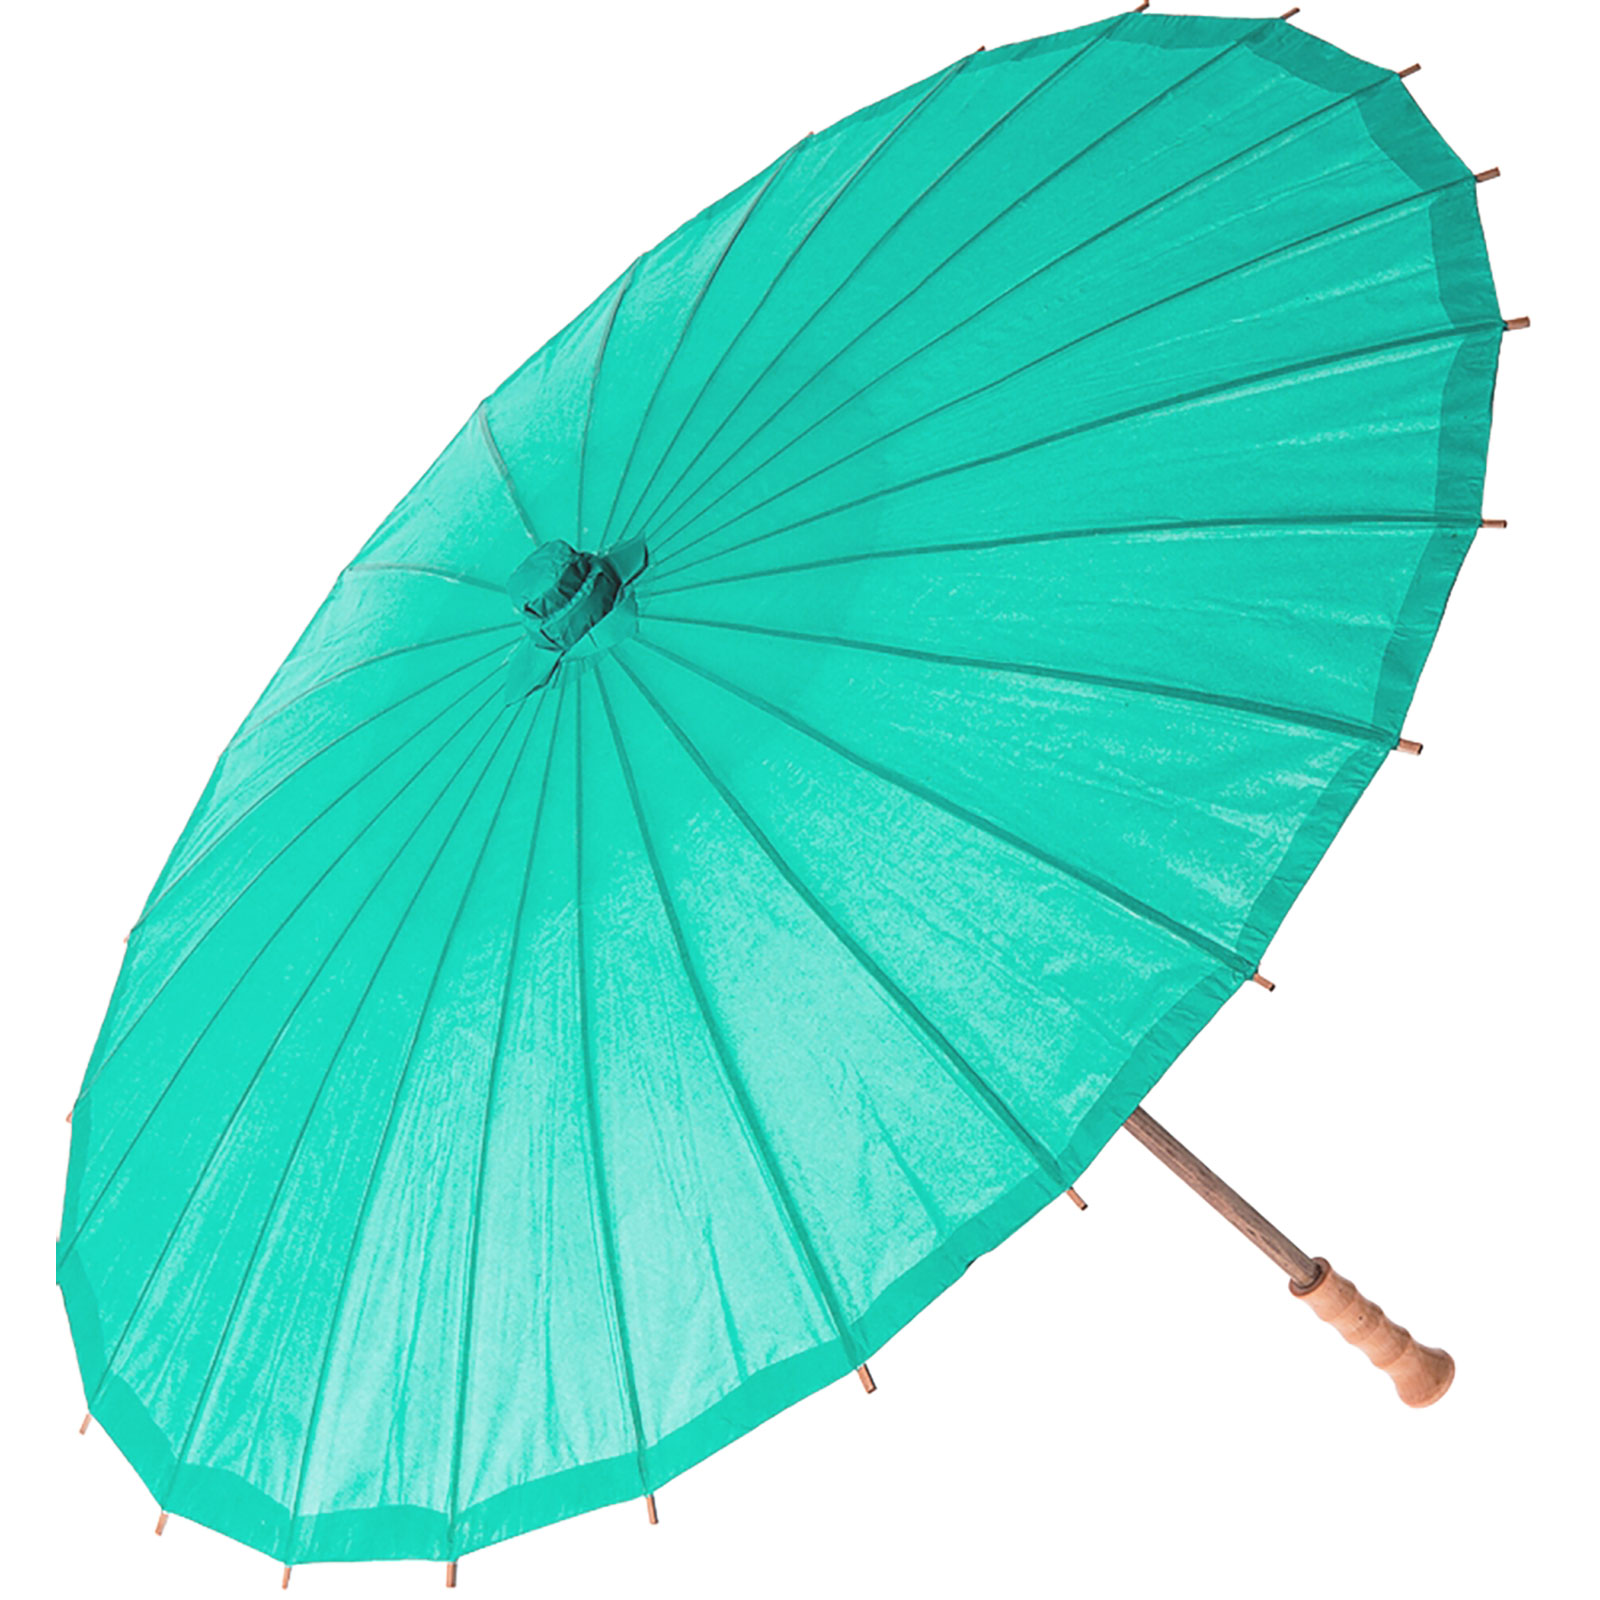 Chinese Paper and Bamboo Parasol with Elegant Handle - Teal Green